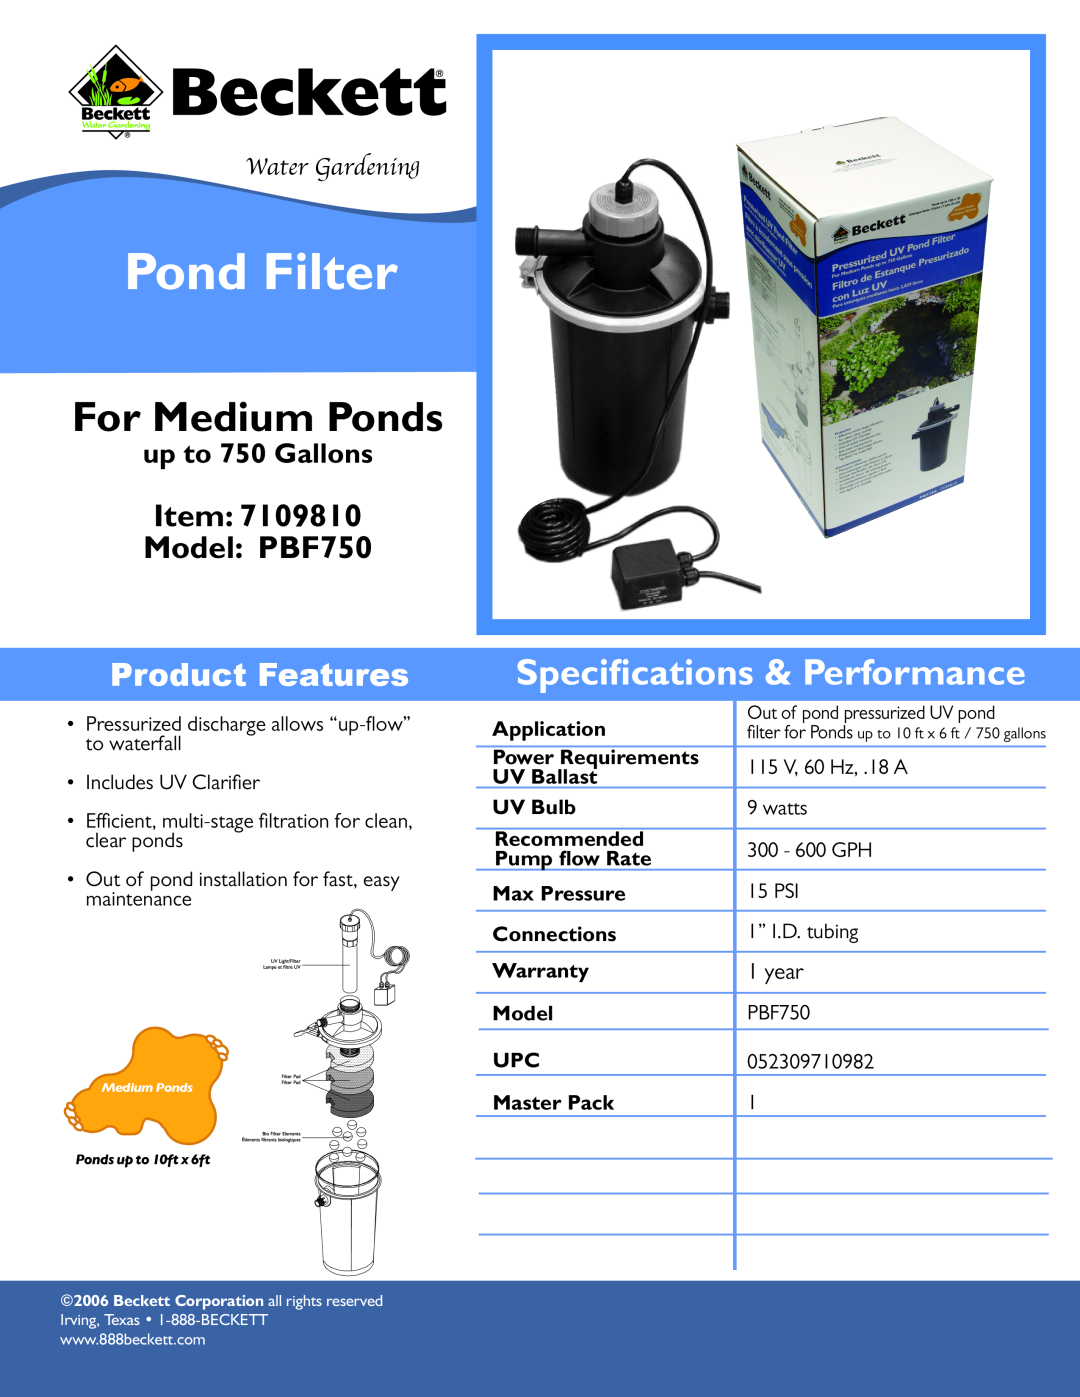 Beckett Water Gardening PBF750 specifications Pond Filter, For Medium Ponds, Speciﬁcations & Performance, Product Features 